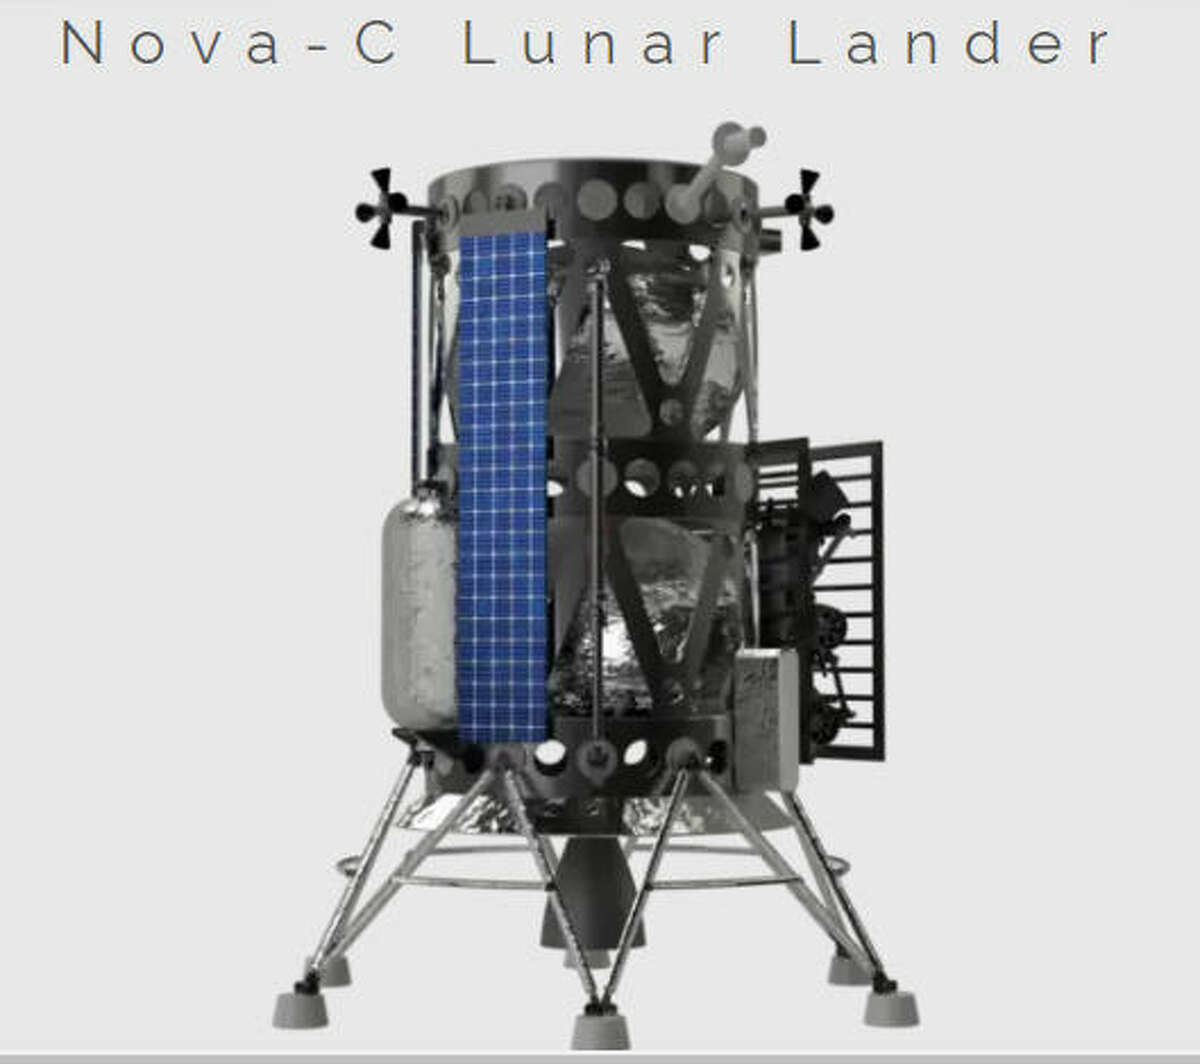 This is a rendering of Houston-based Intuitive Machines' moon lander, known as Nova-C. The company was one of nine chosen by NASA to build a lander that could carry science experiments and instruments to the lunar surface.